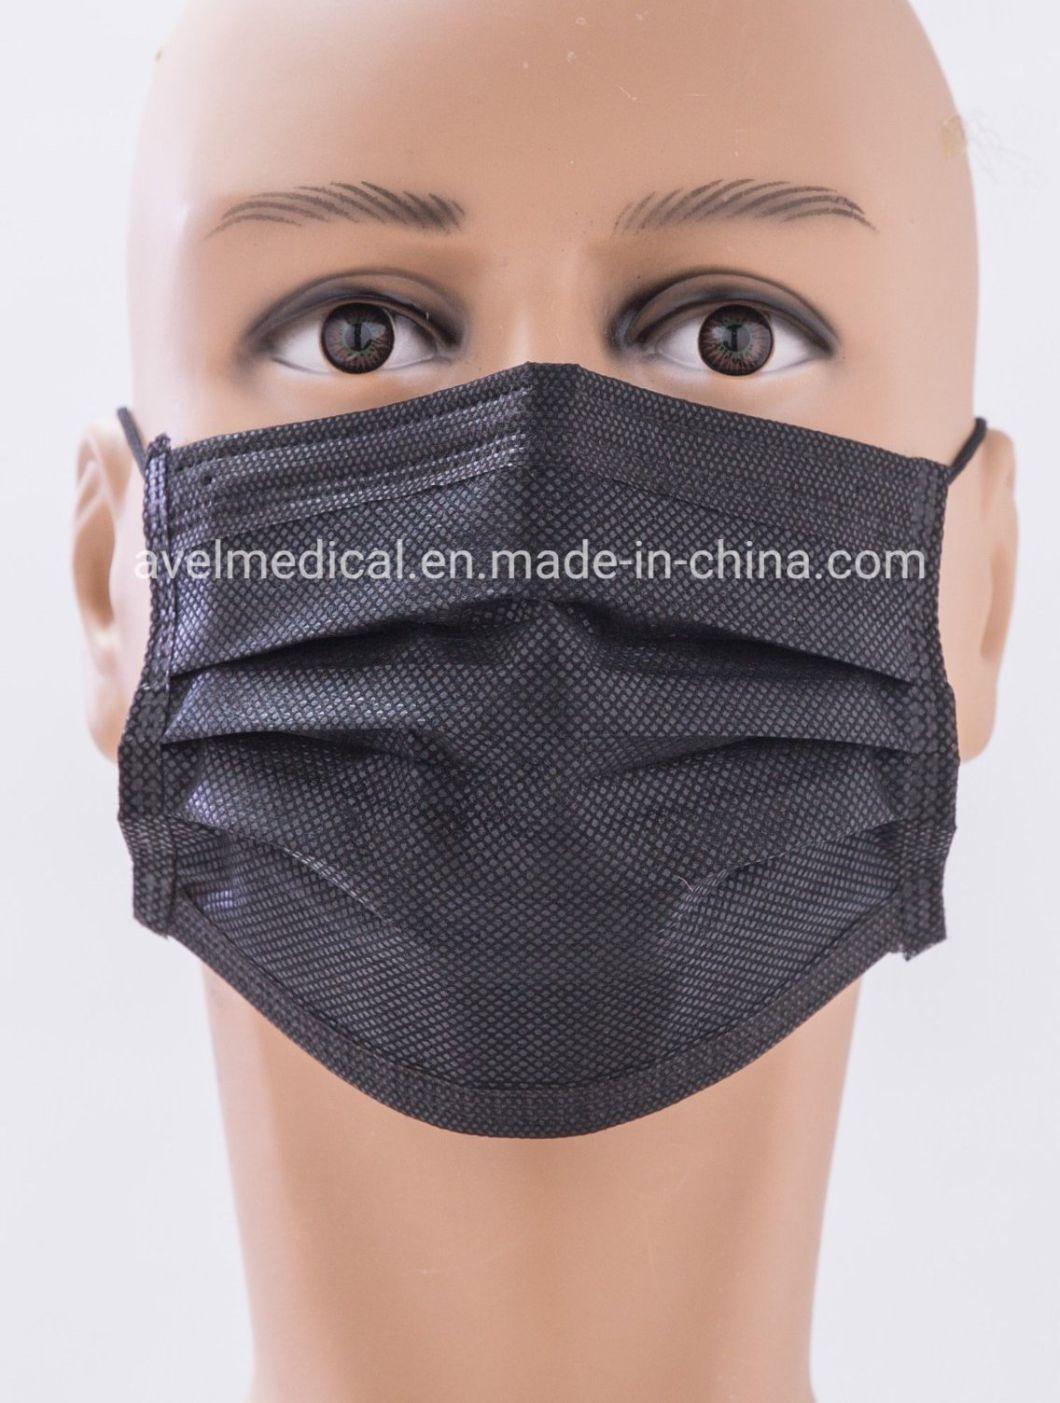 Medical Surgical Mask Type I II Iir Anti Dust and Virus Protective 3 Ply Disposable Face Mask with Earloop Ficial Mask Daily Protection Civil Use Cheap Price